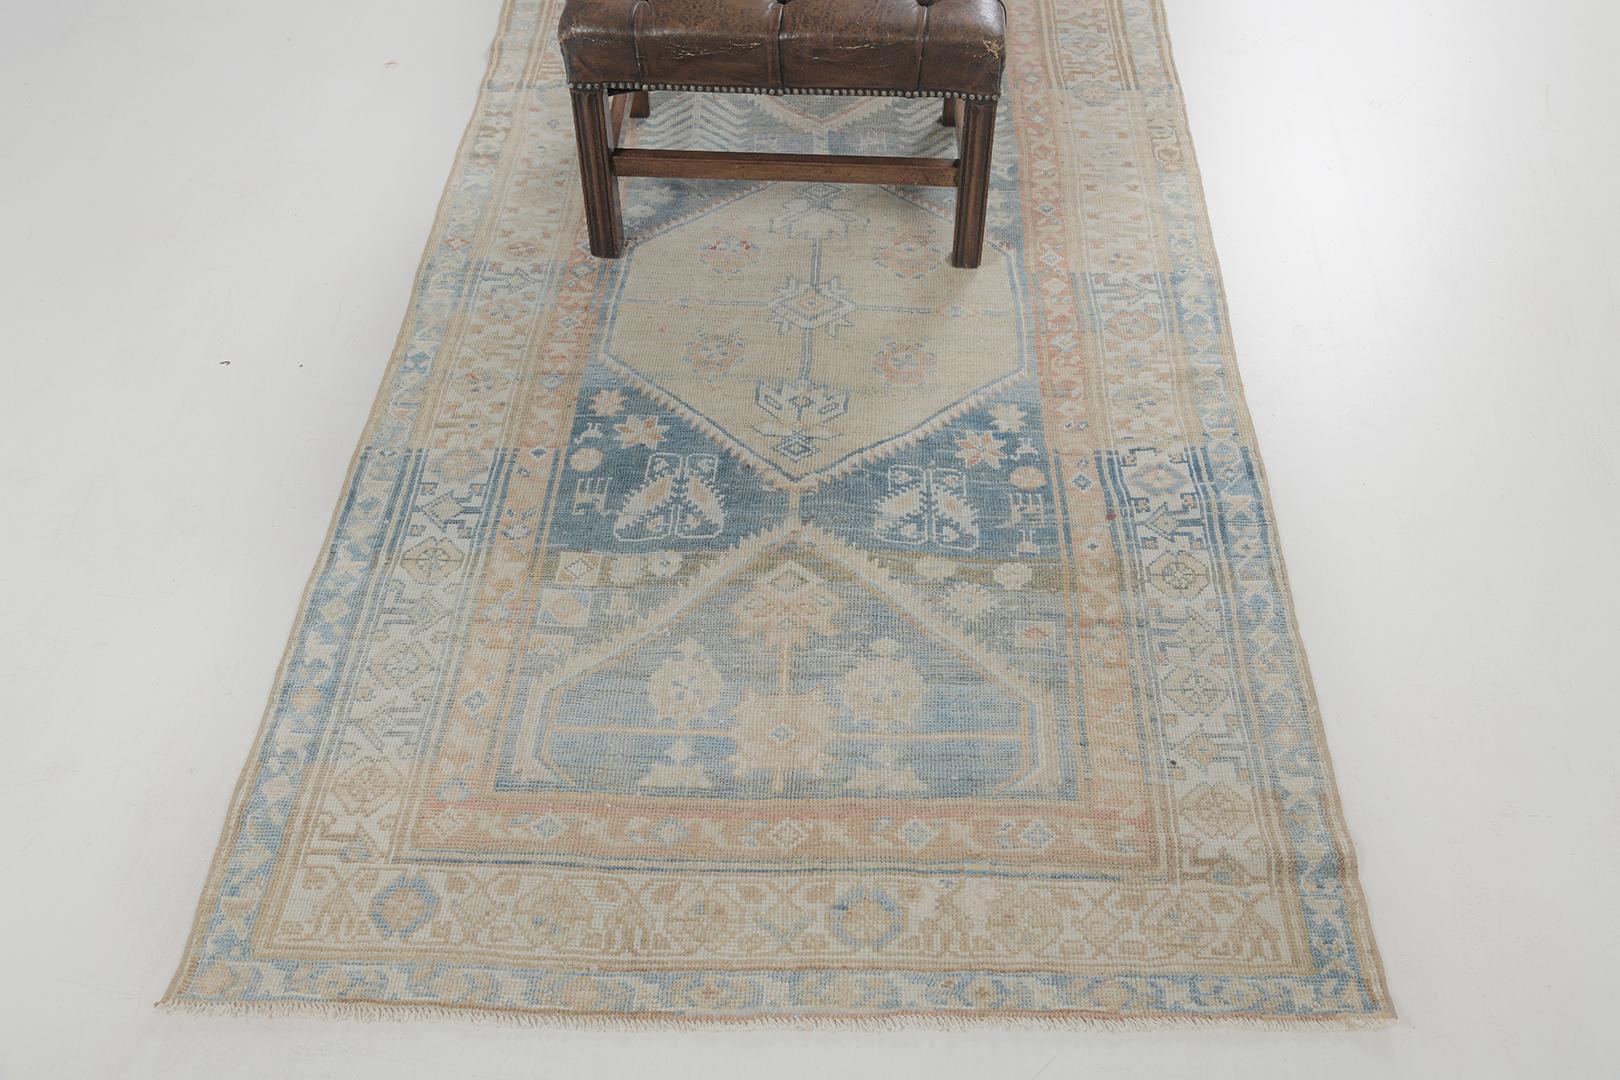 This phenomenal Antique Persian Kurdish is in cream, aegean blue, cinnamon and ivory blend of colours. It is distinguished by its stunning series of medallions lining up together to create a mesmerizing piece that will surely captivate the viewer’s